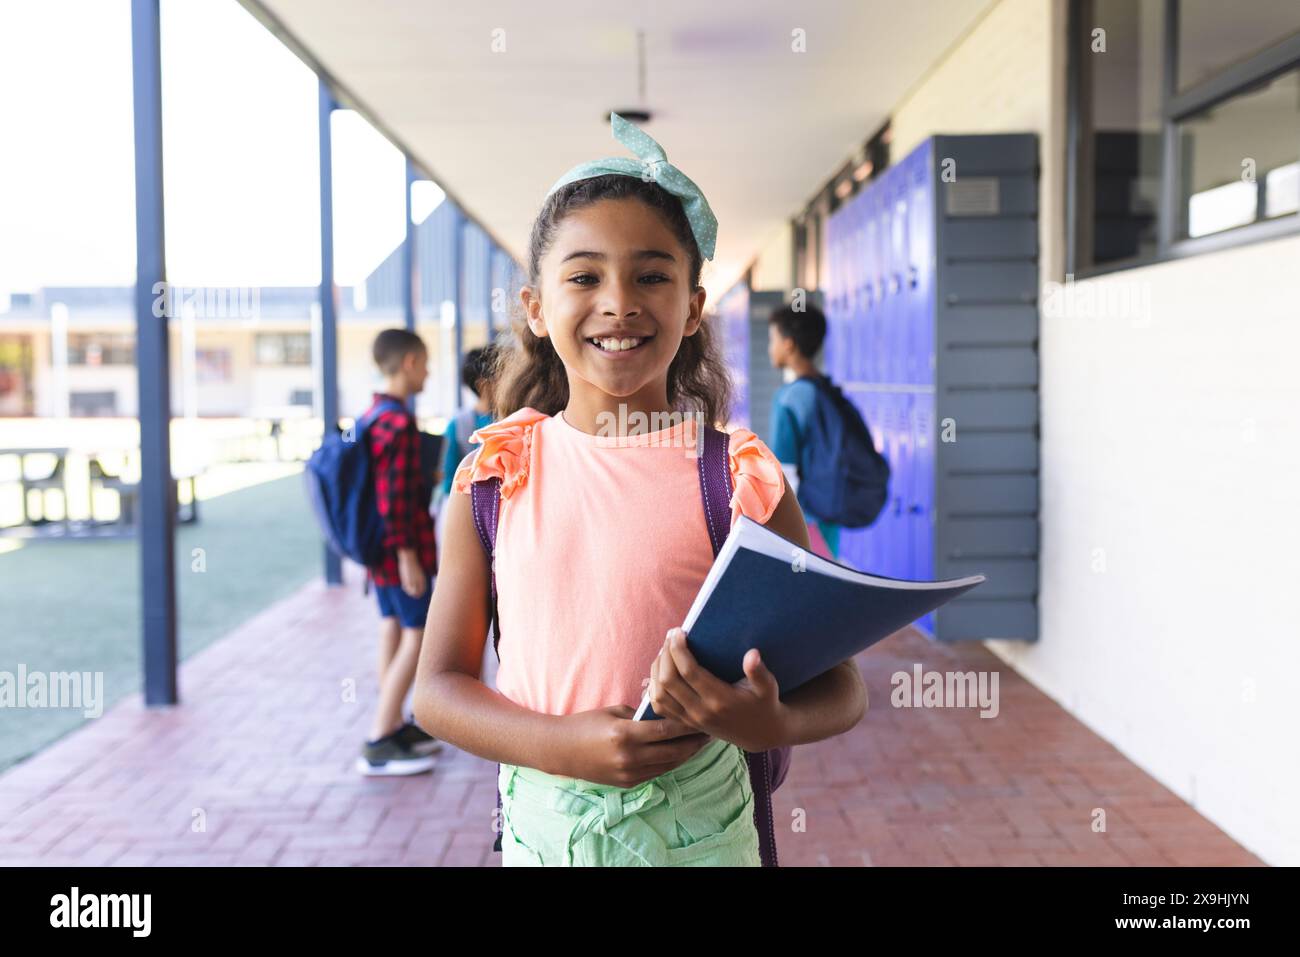 Biracial girl with a blue book stands smiling in a school corridor Stock Photo